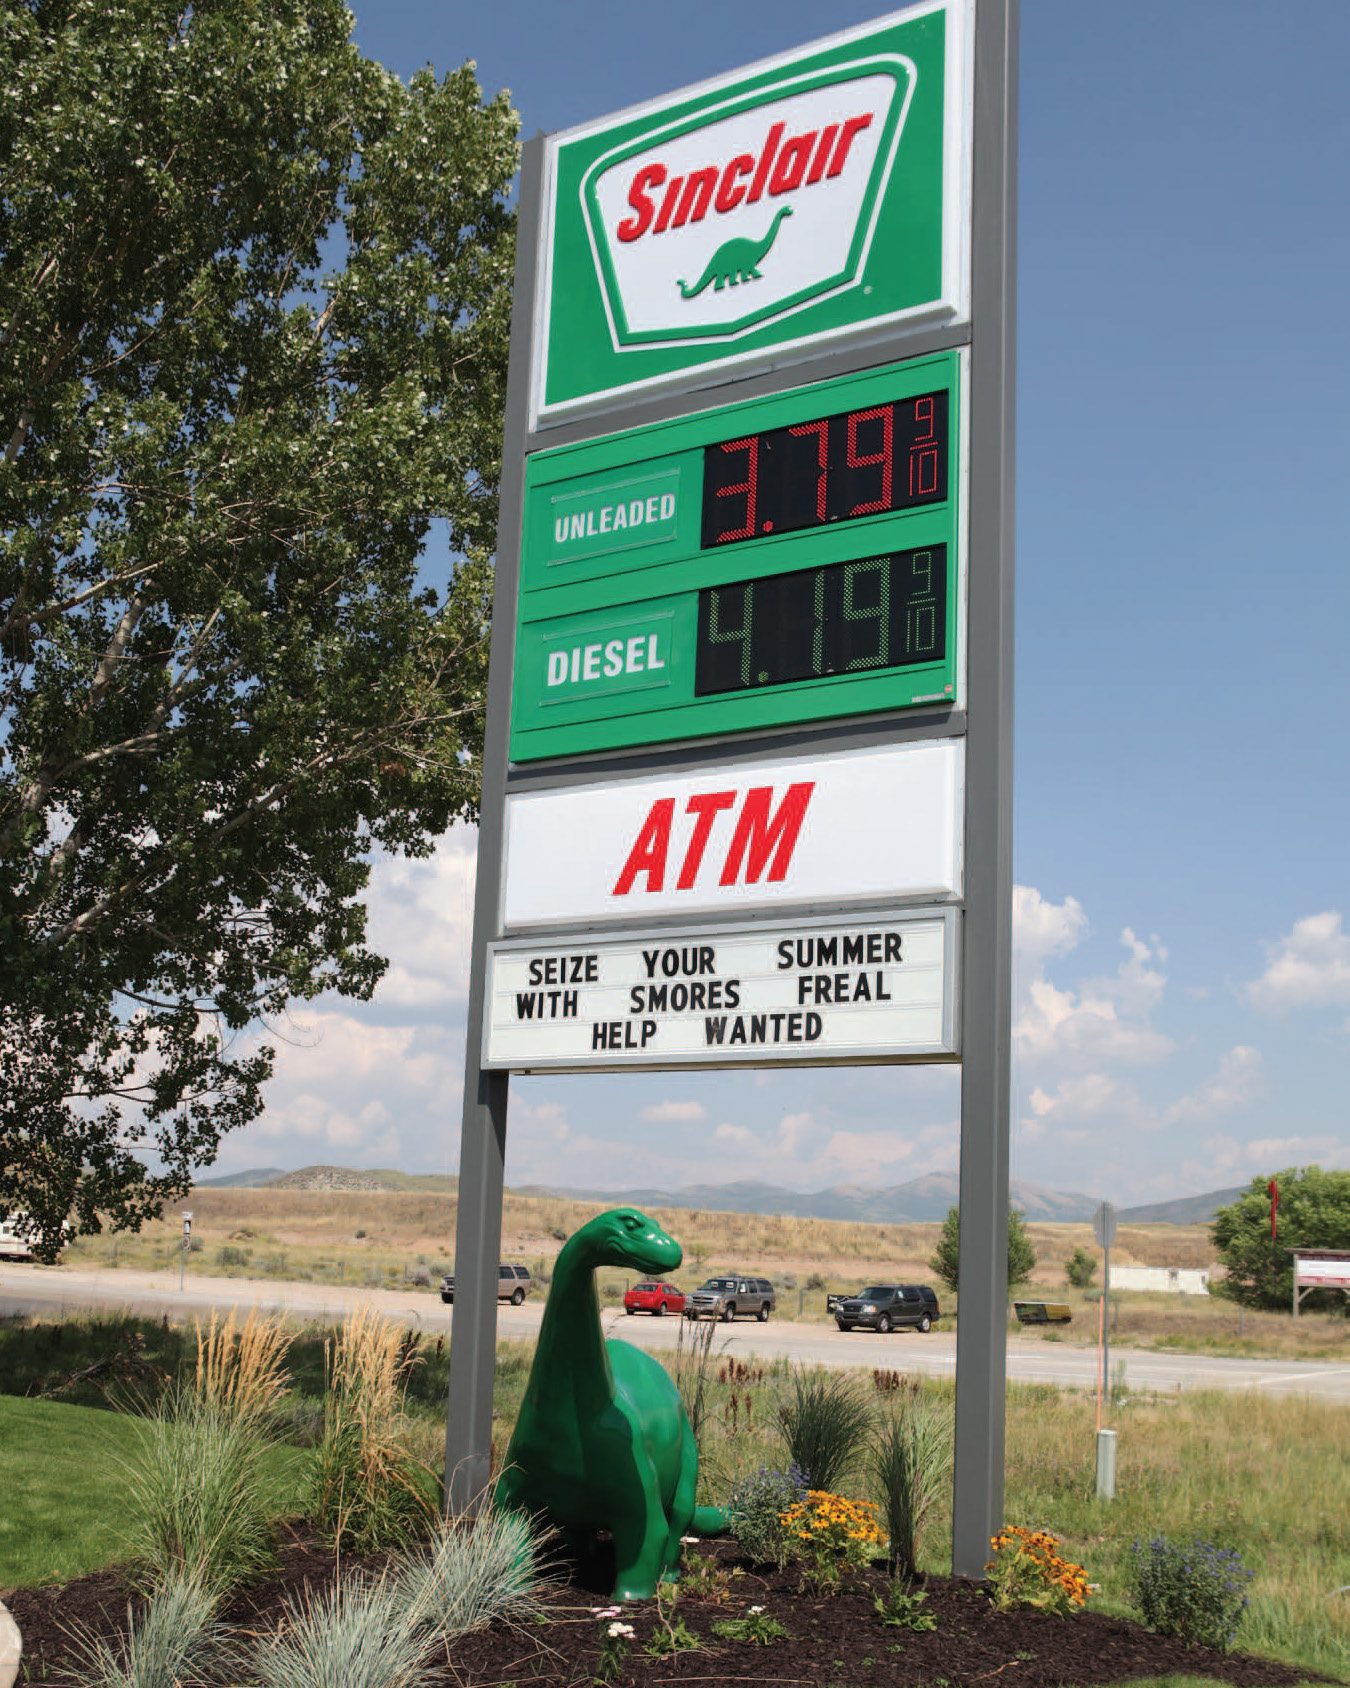 Sinclair Oil gas station sign